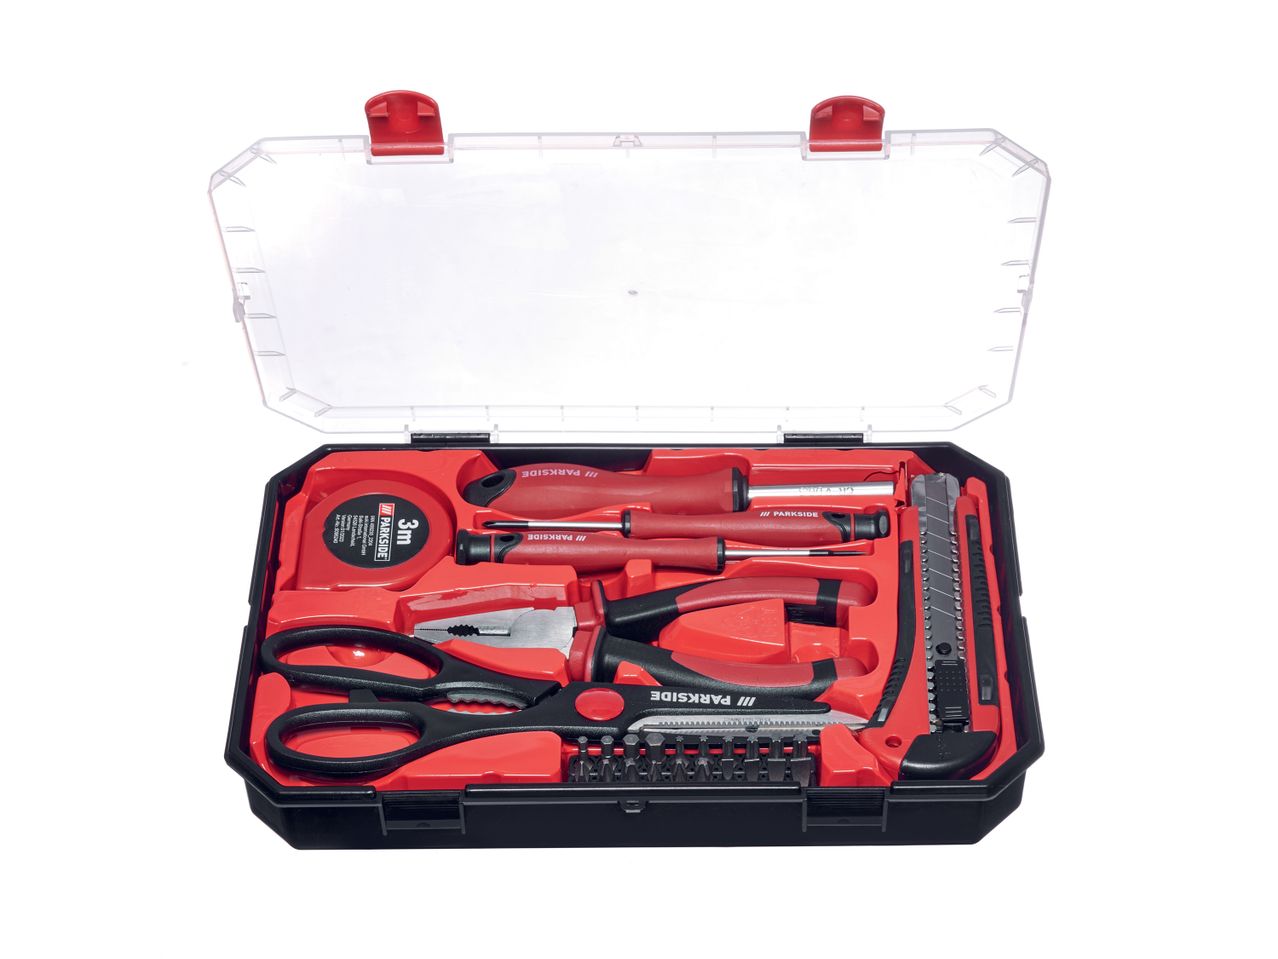 Go to full screen view: Household Tool Kit - Image 4